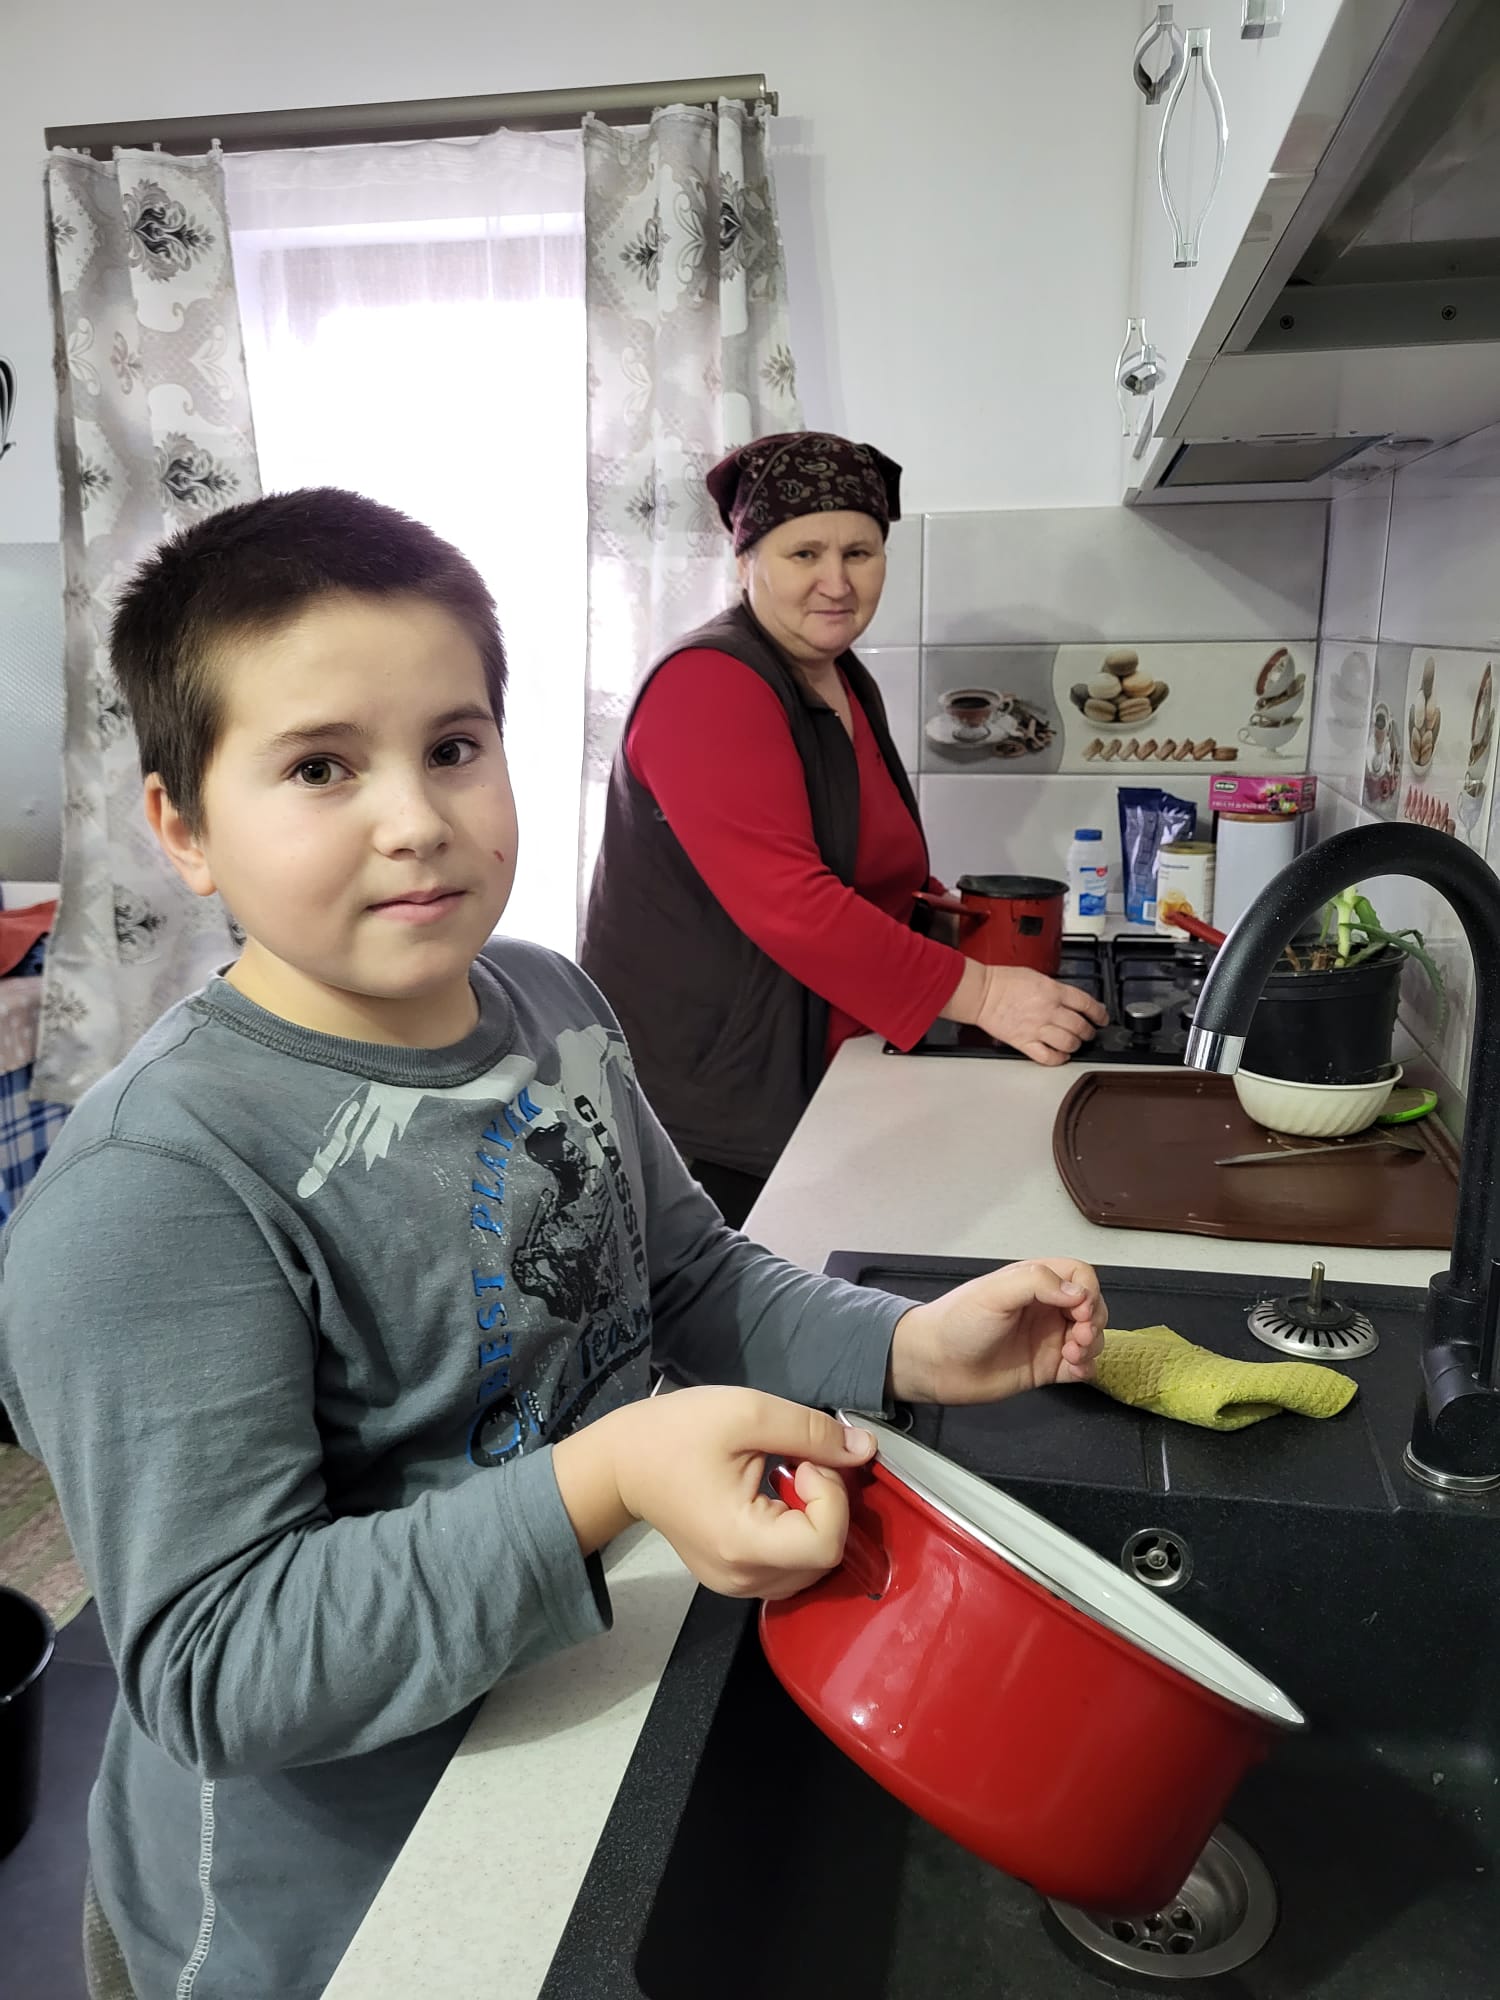 Ionut helps his grandmother with the dishes at home